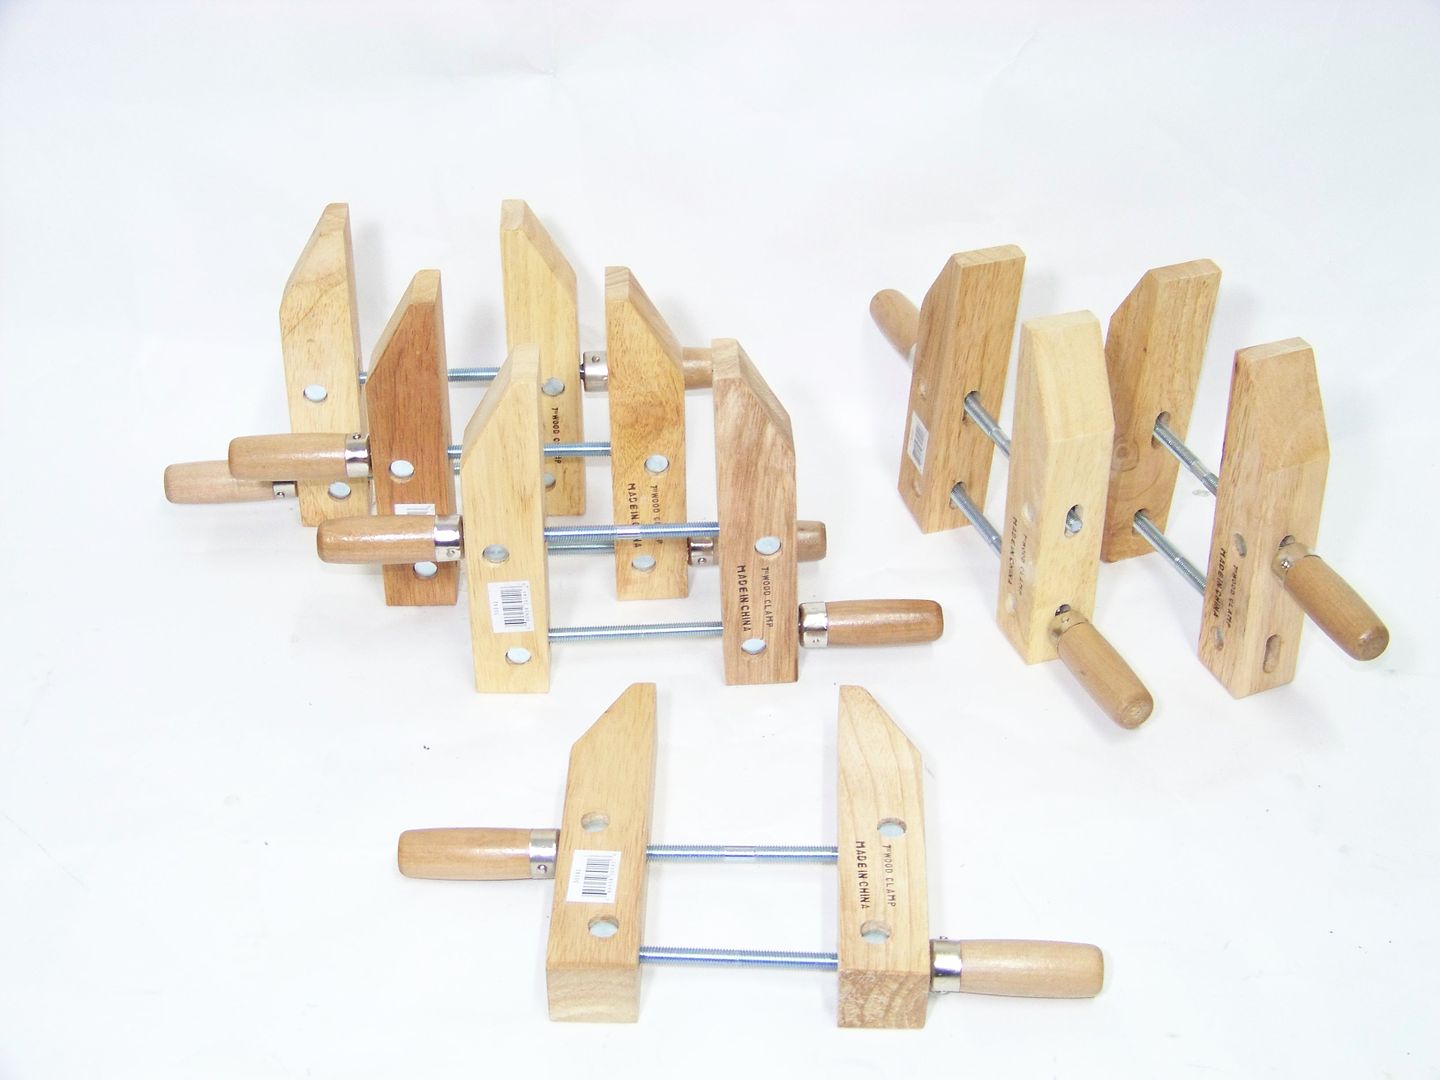 6 pcs 7 wood working clamps tools wood handscrew clamps 